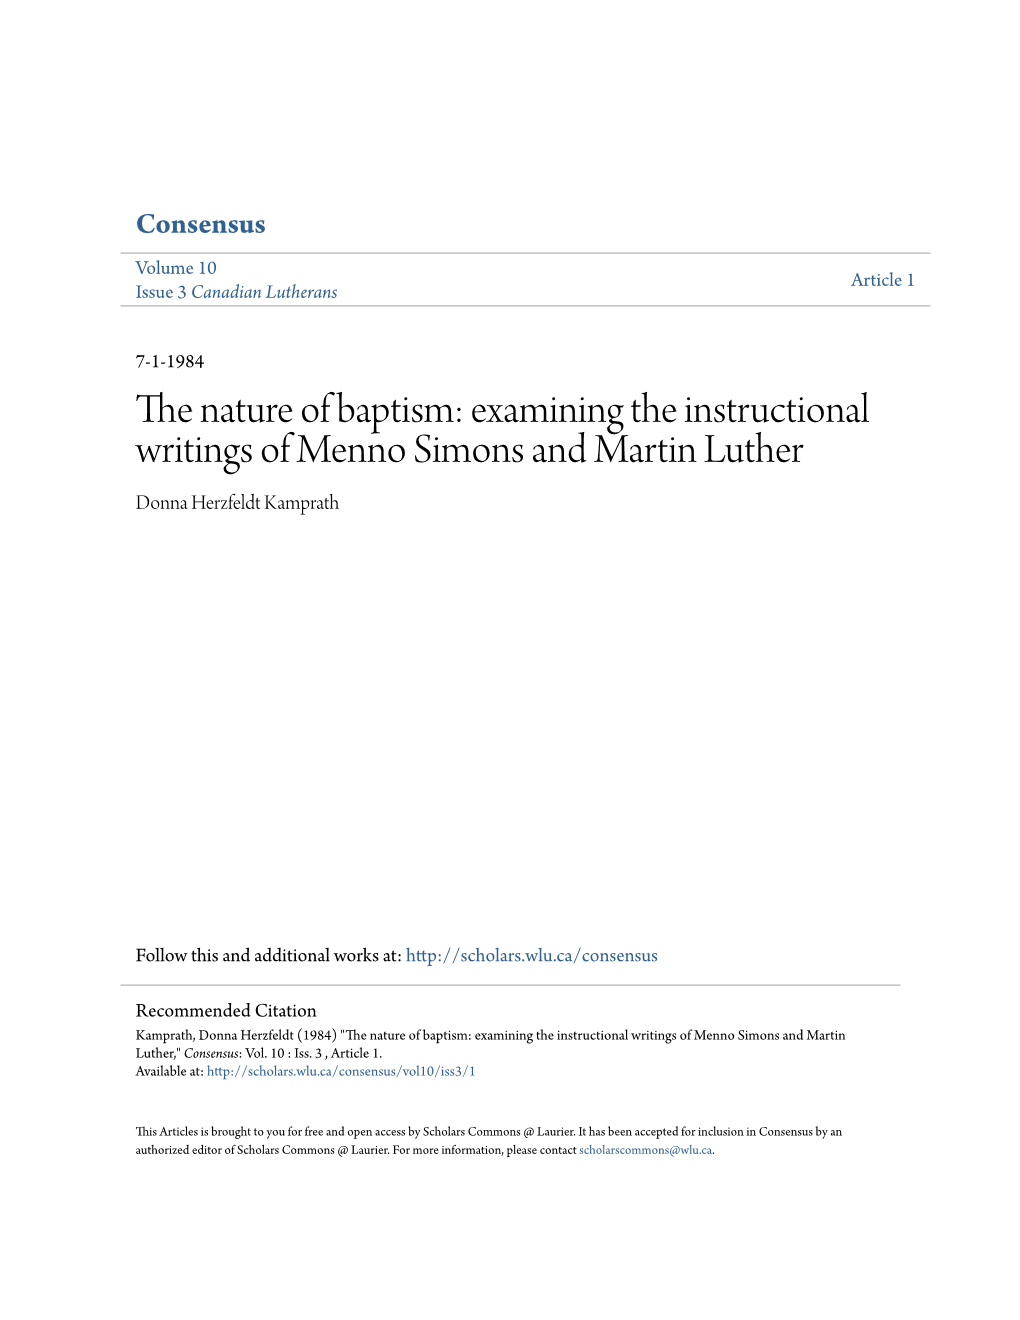 The Nature of Baptism: Examining the Instructional Writings of Menno Simons and Martin Luther